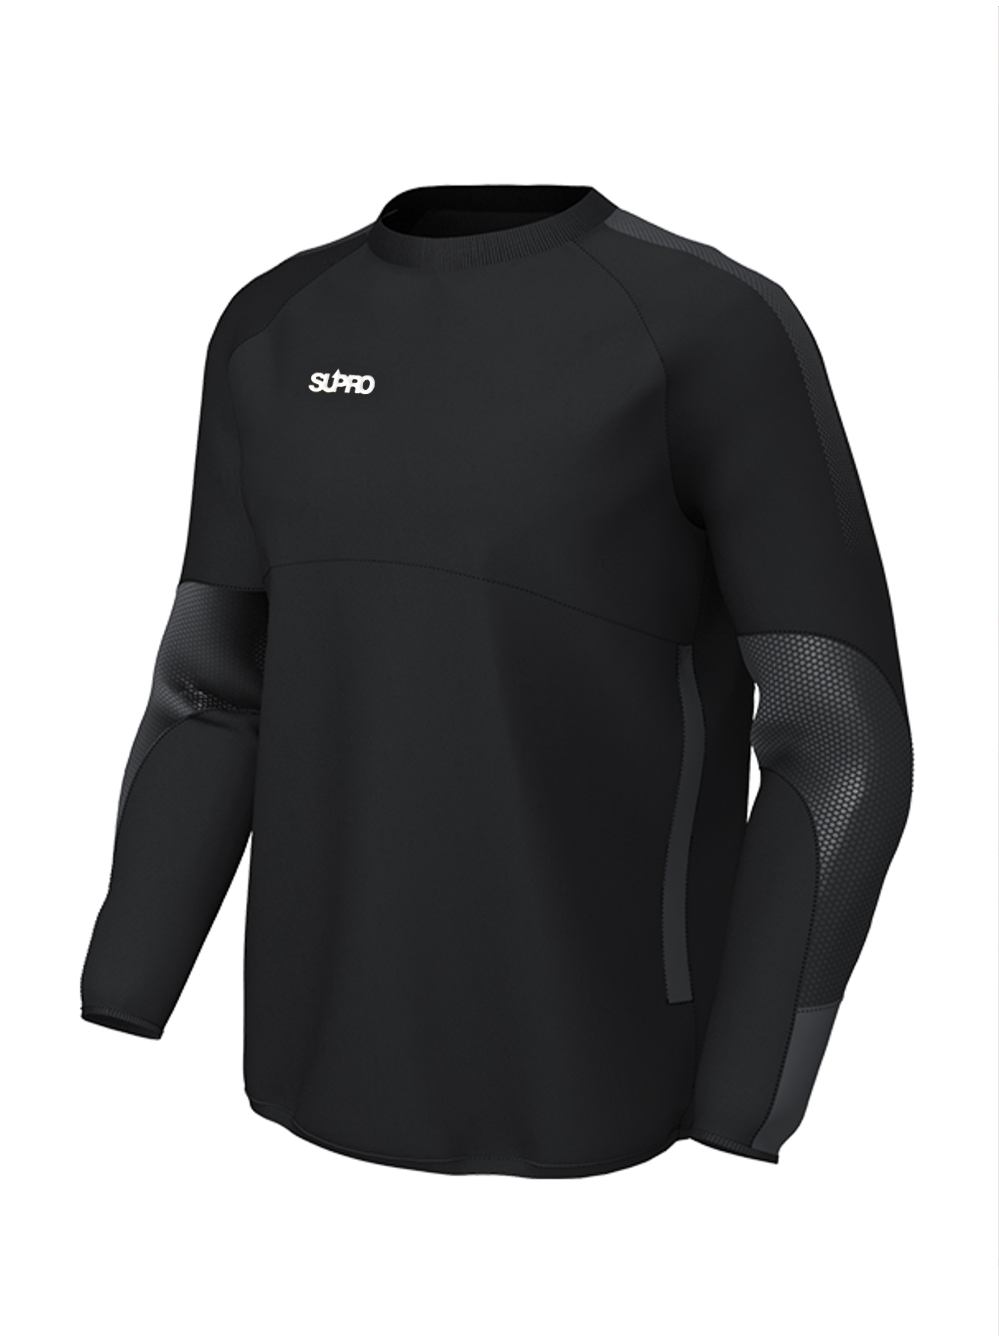 Supro Adult Training Top